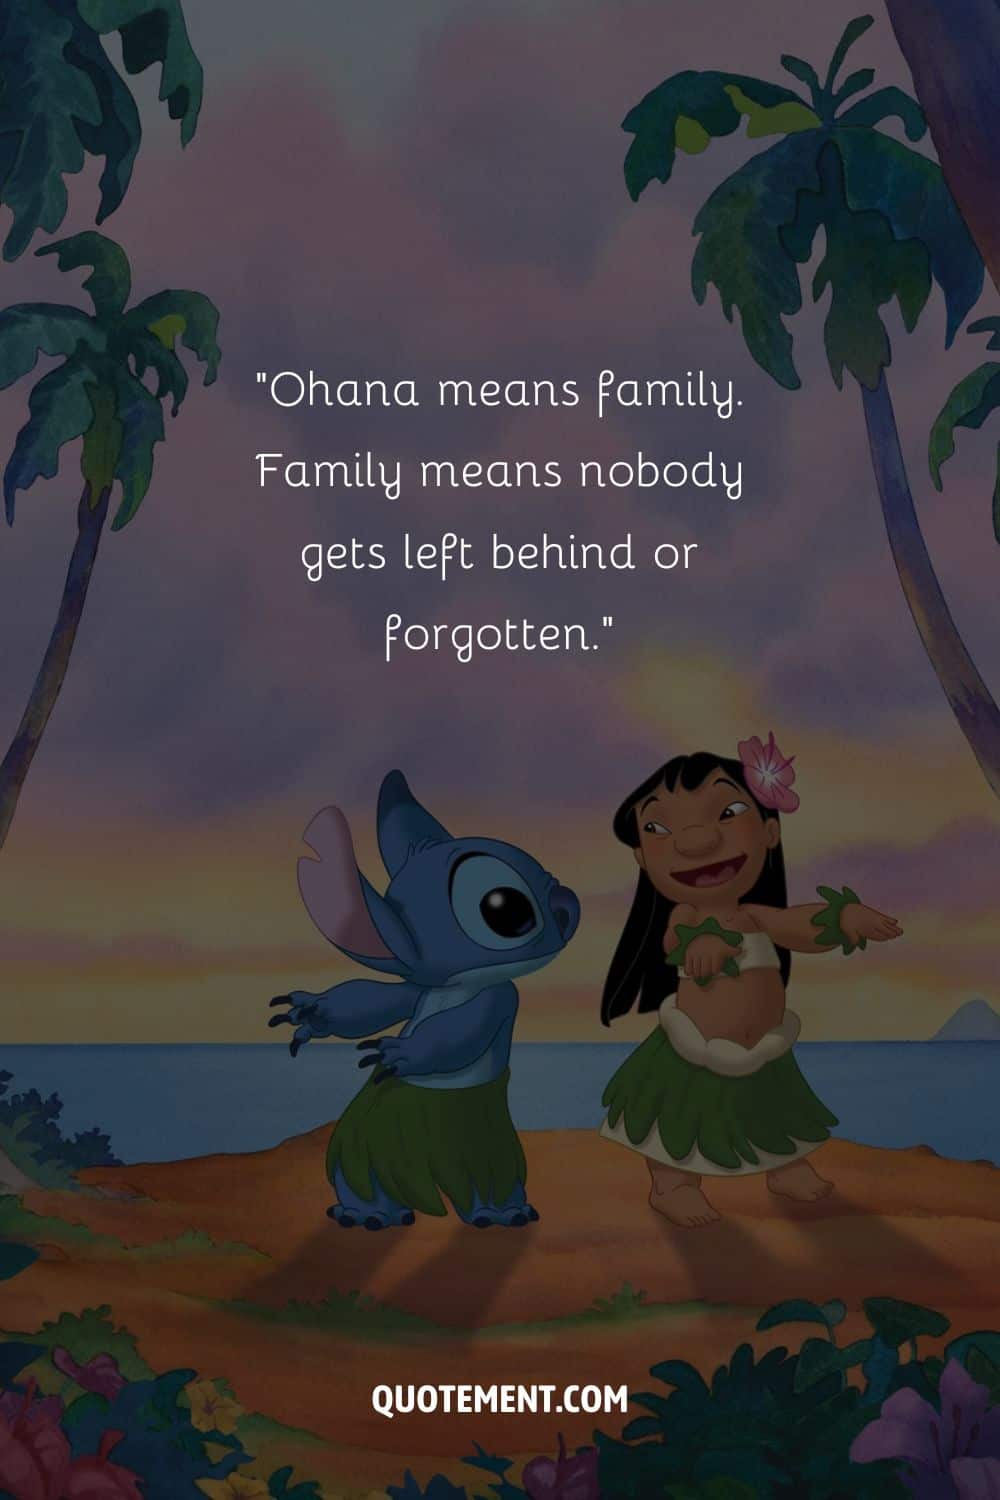 Lilo and Stitch dancing on the beach